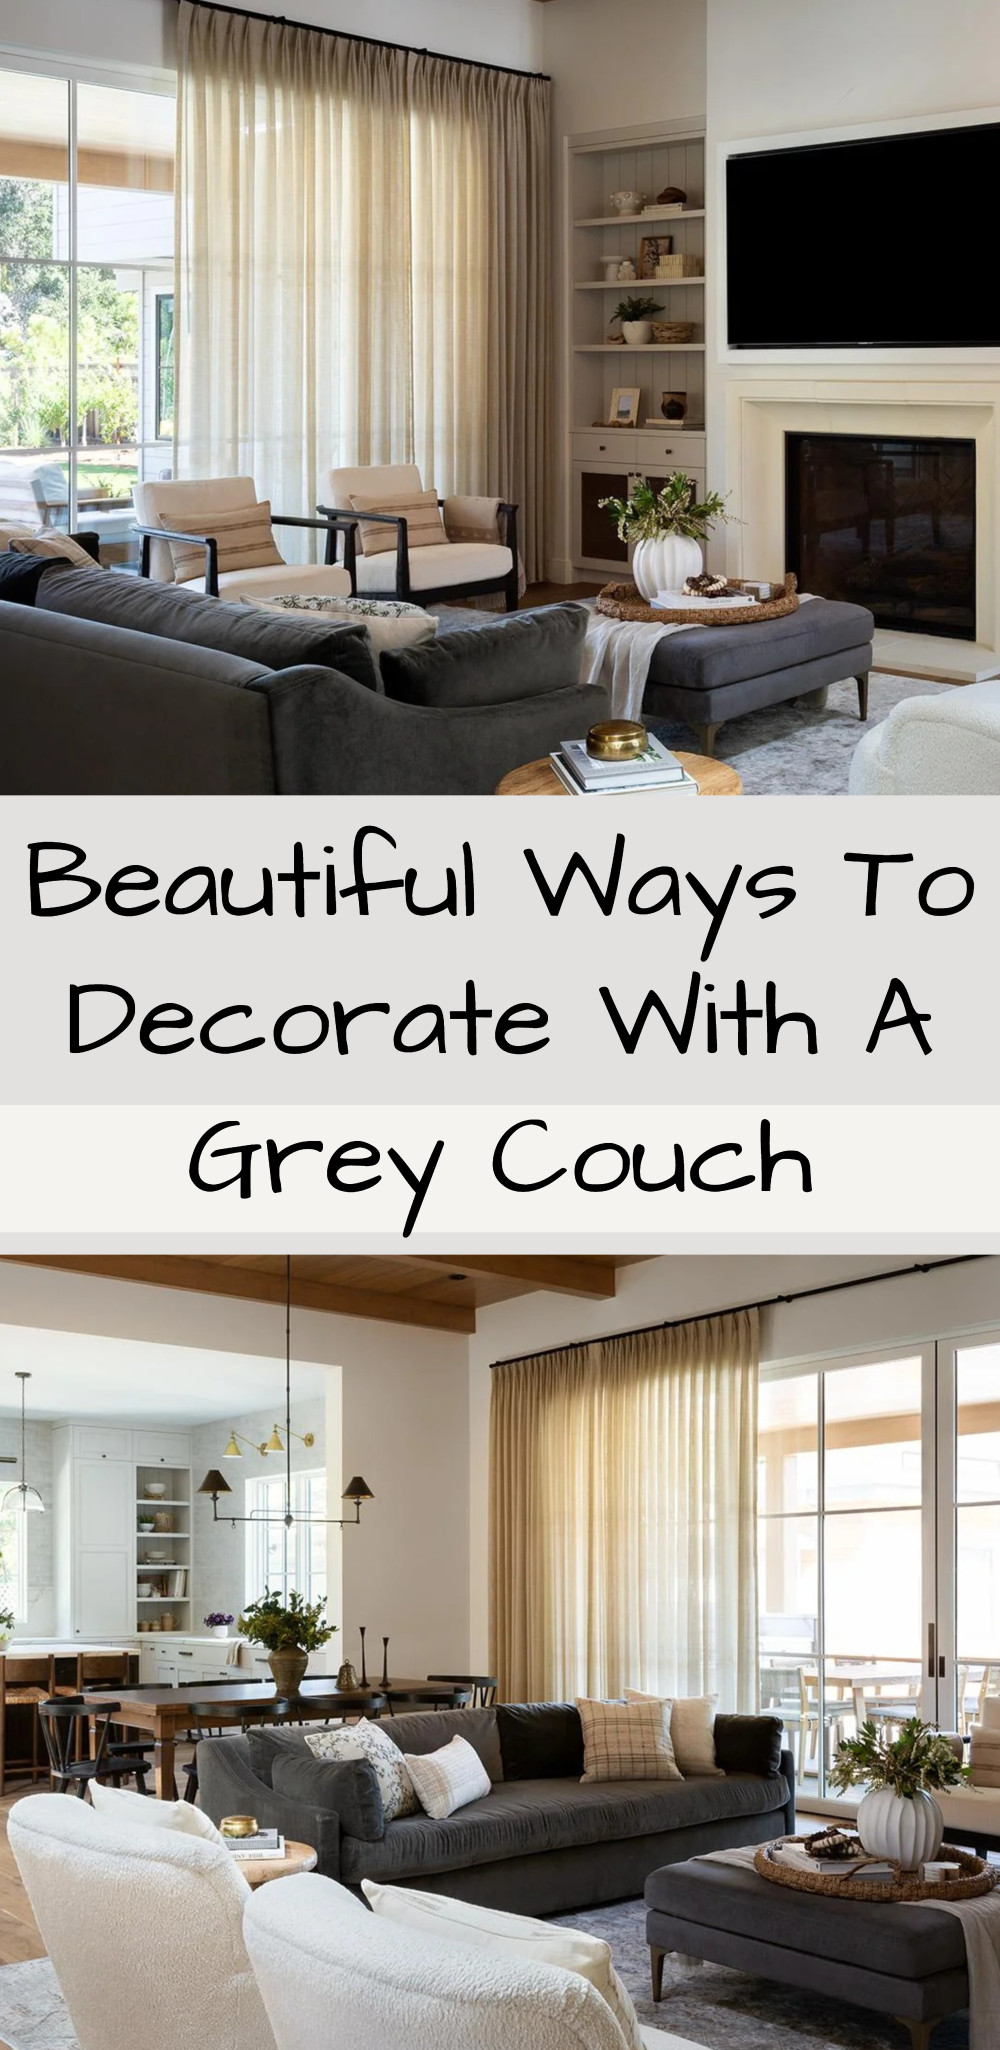 Living Room Decor Ideas With a grey Couch